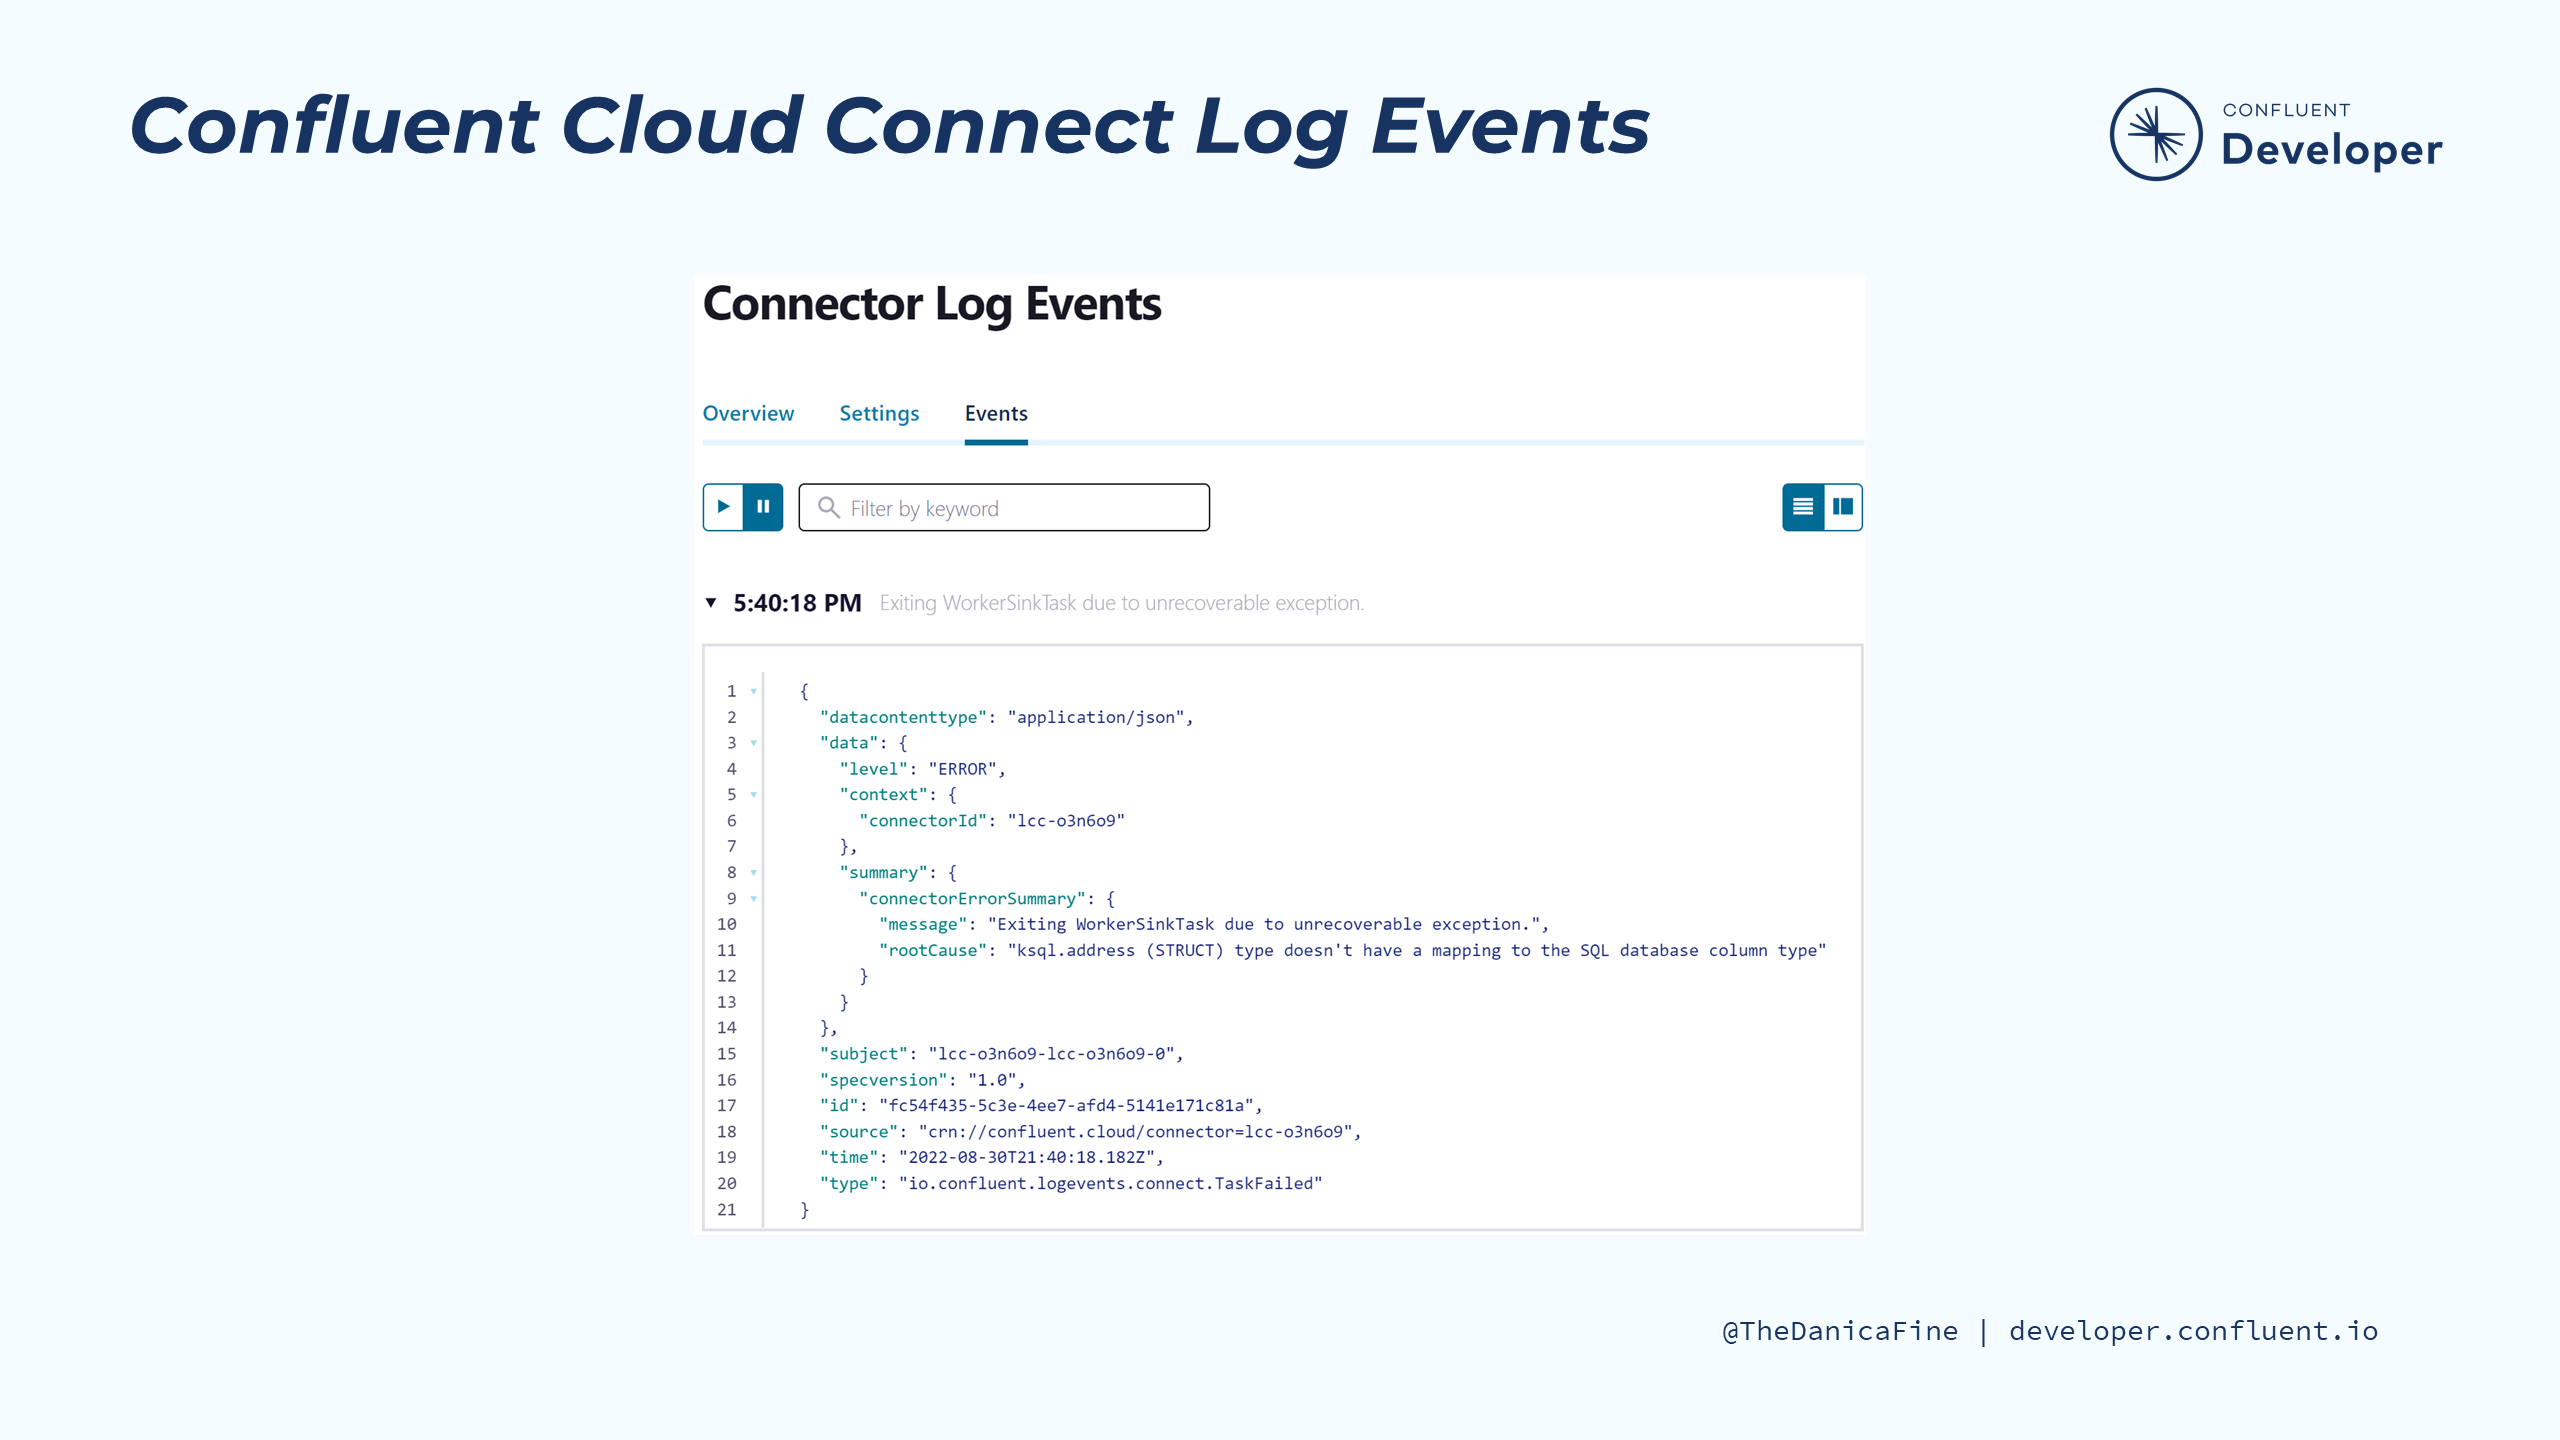 managed-connector-log-events